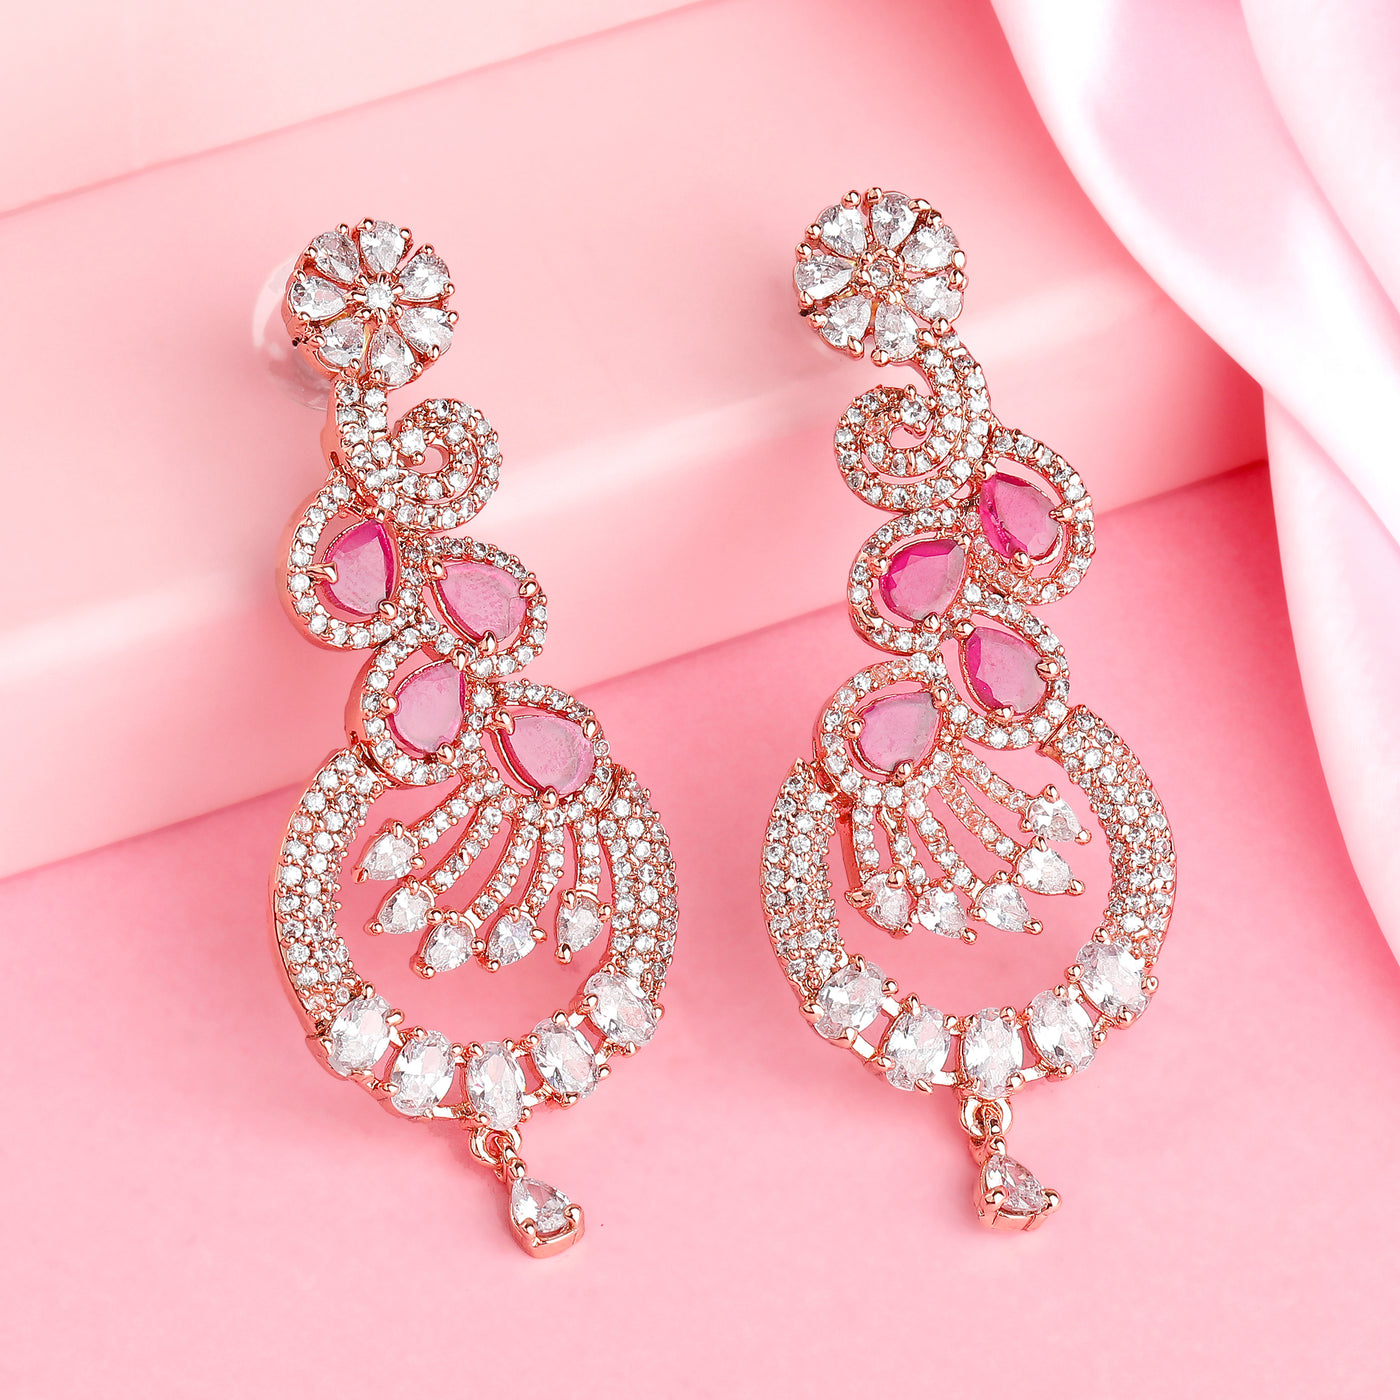 Estele Rose Gold Plated CZ Scintillating Earrings with Ruby Crystals for Women